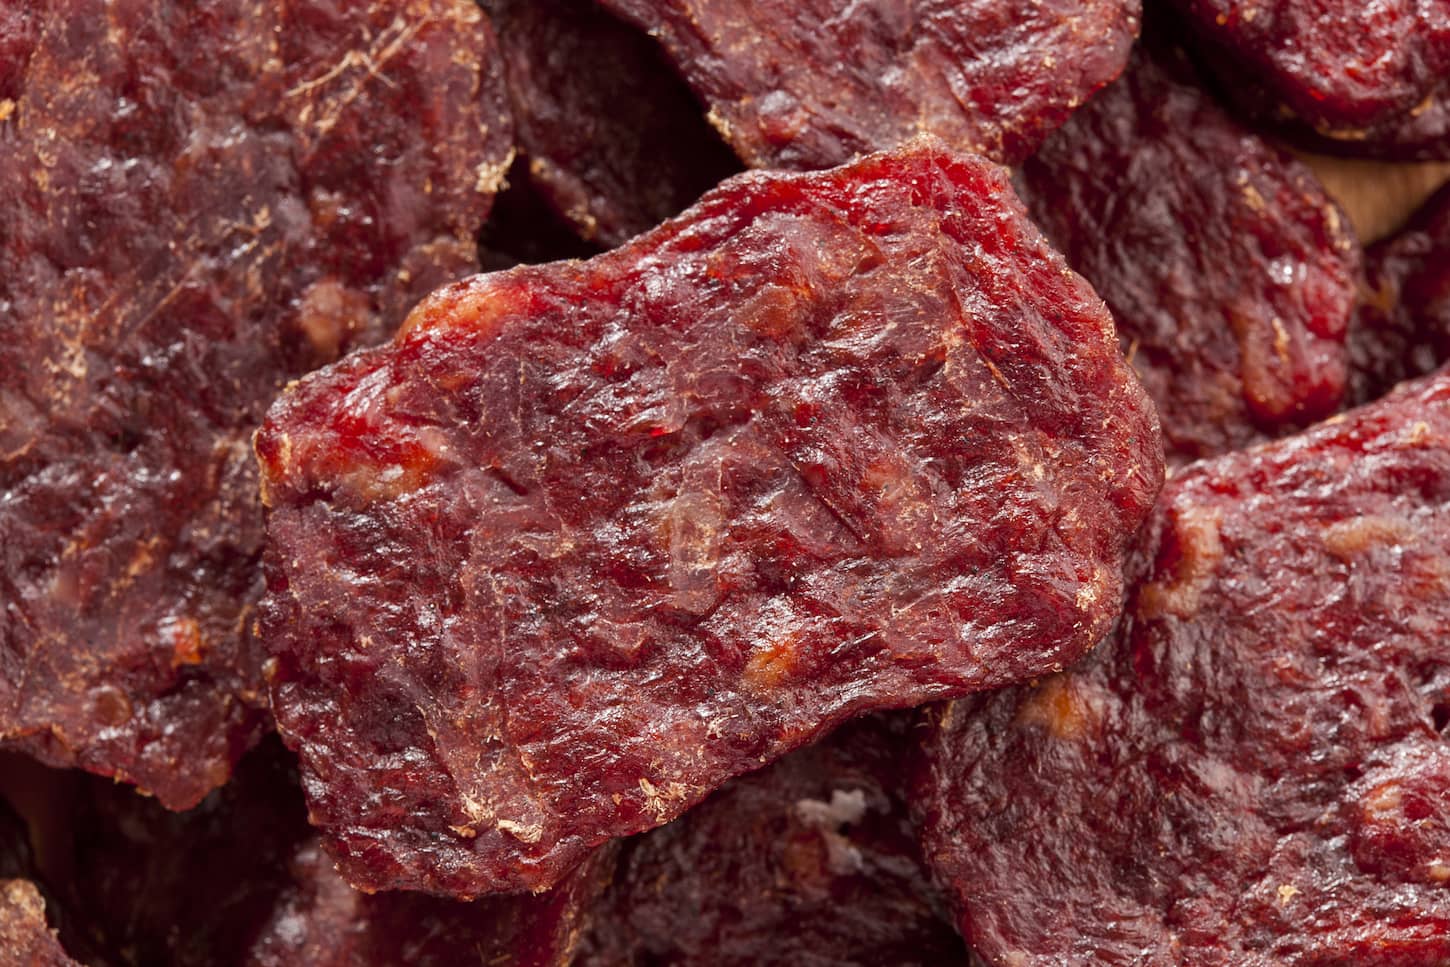 An image of a dried processed beef jerky.